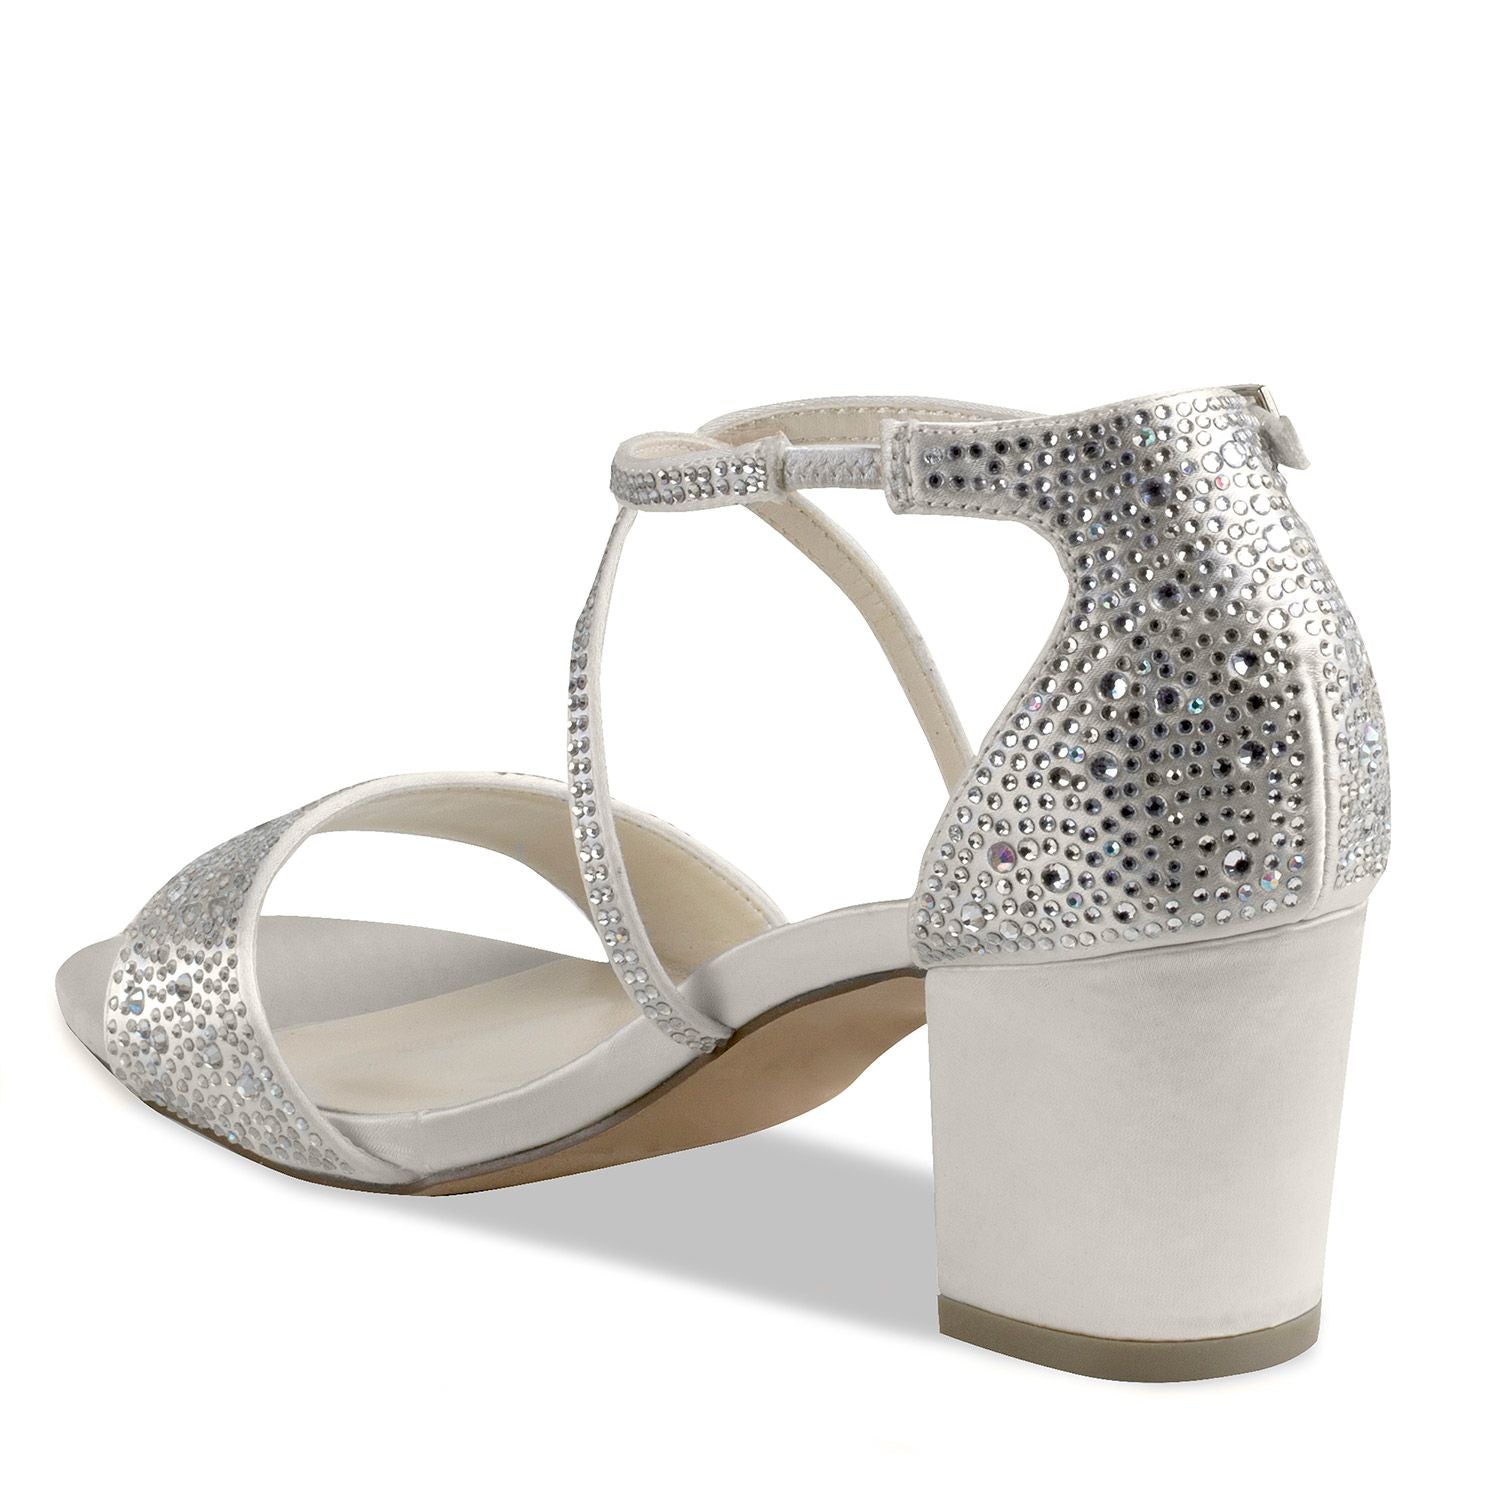 Left view of Shimmer shoe with 2 inch block heel and elegant stones